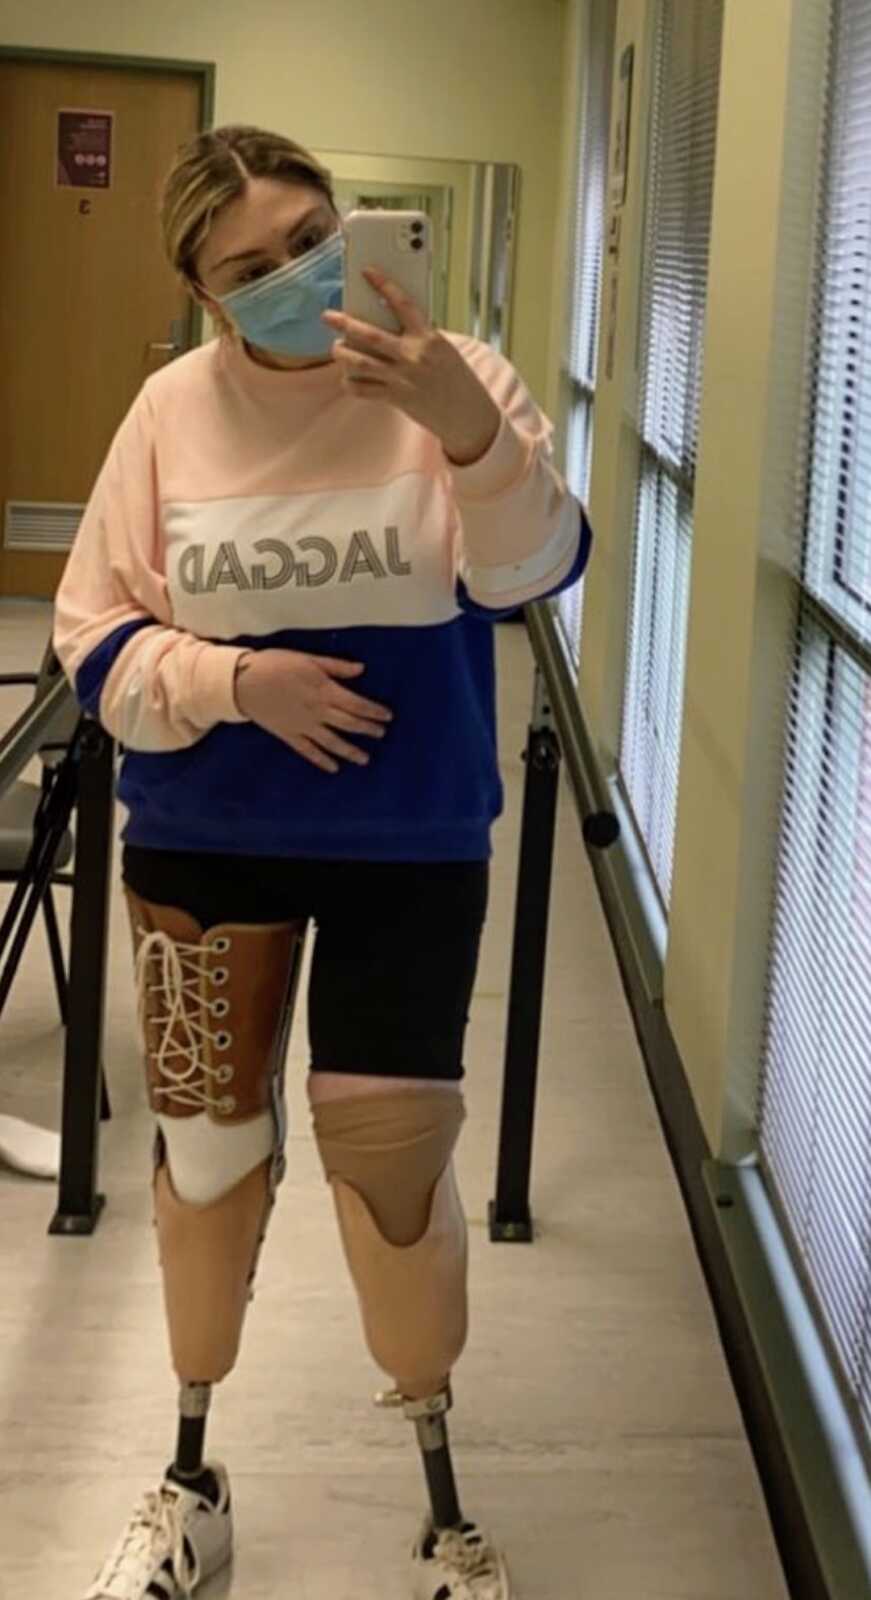 double amputee stands in her prosthetics